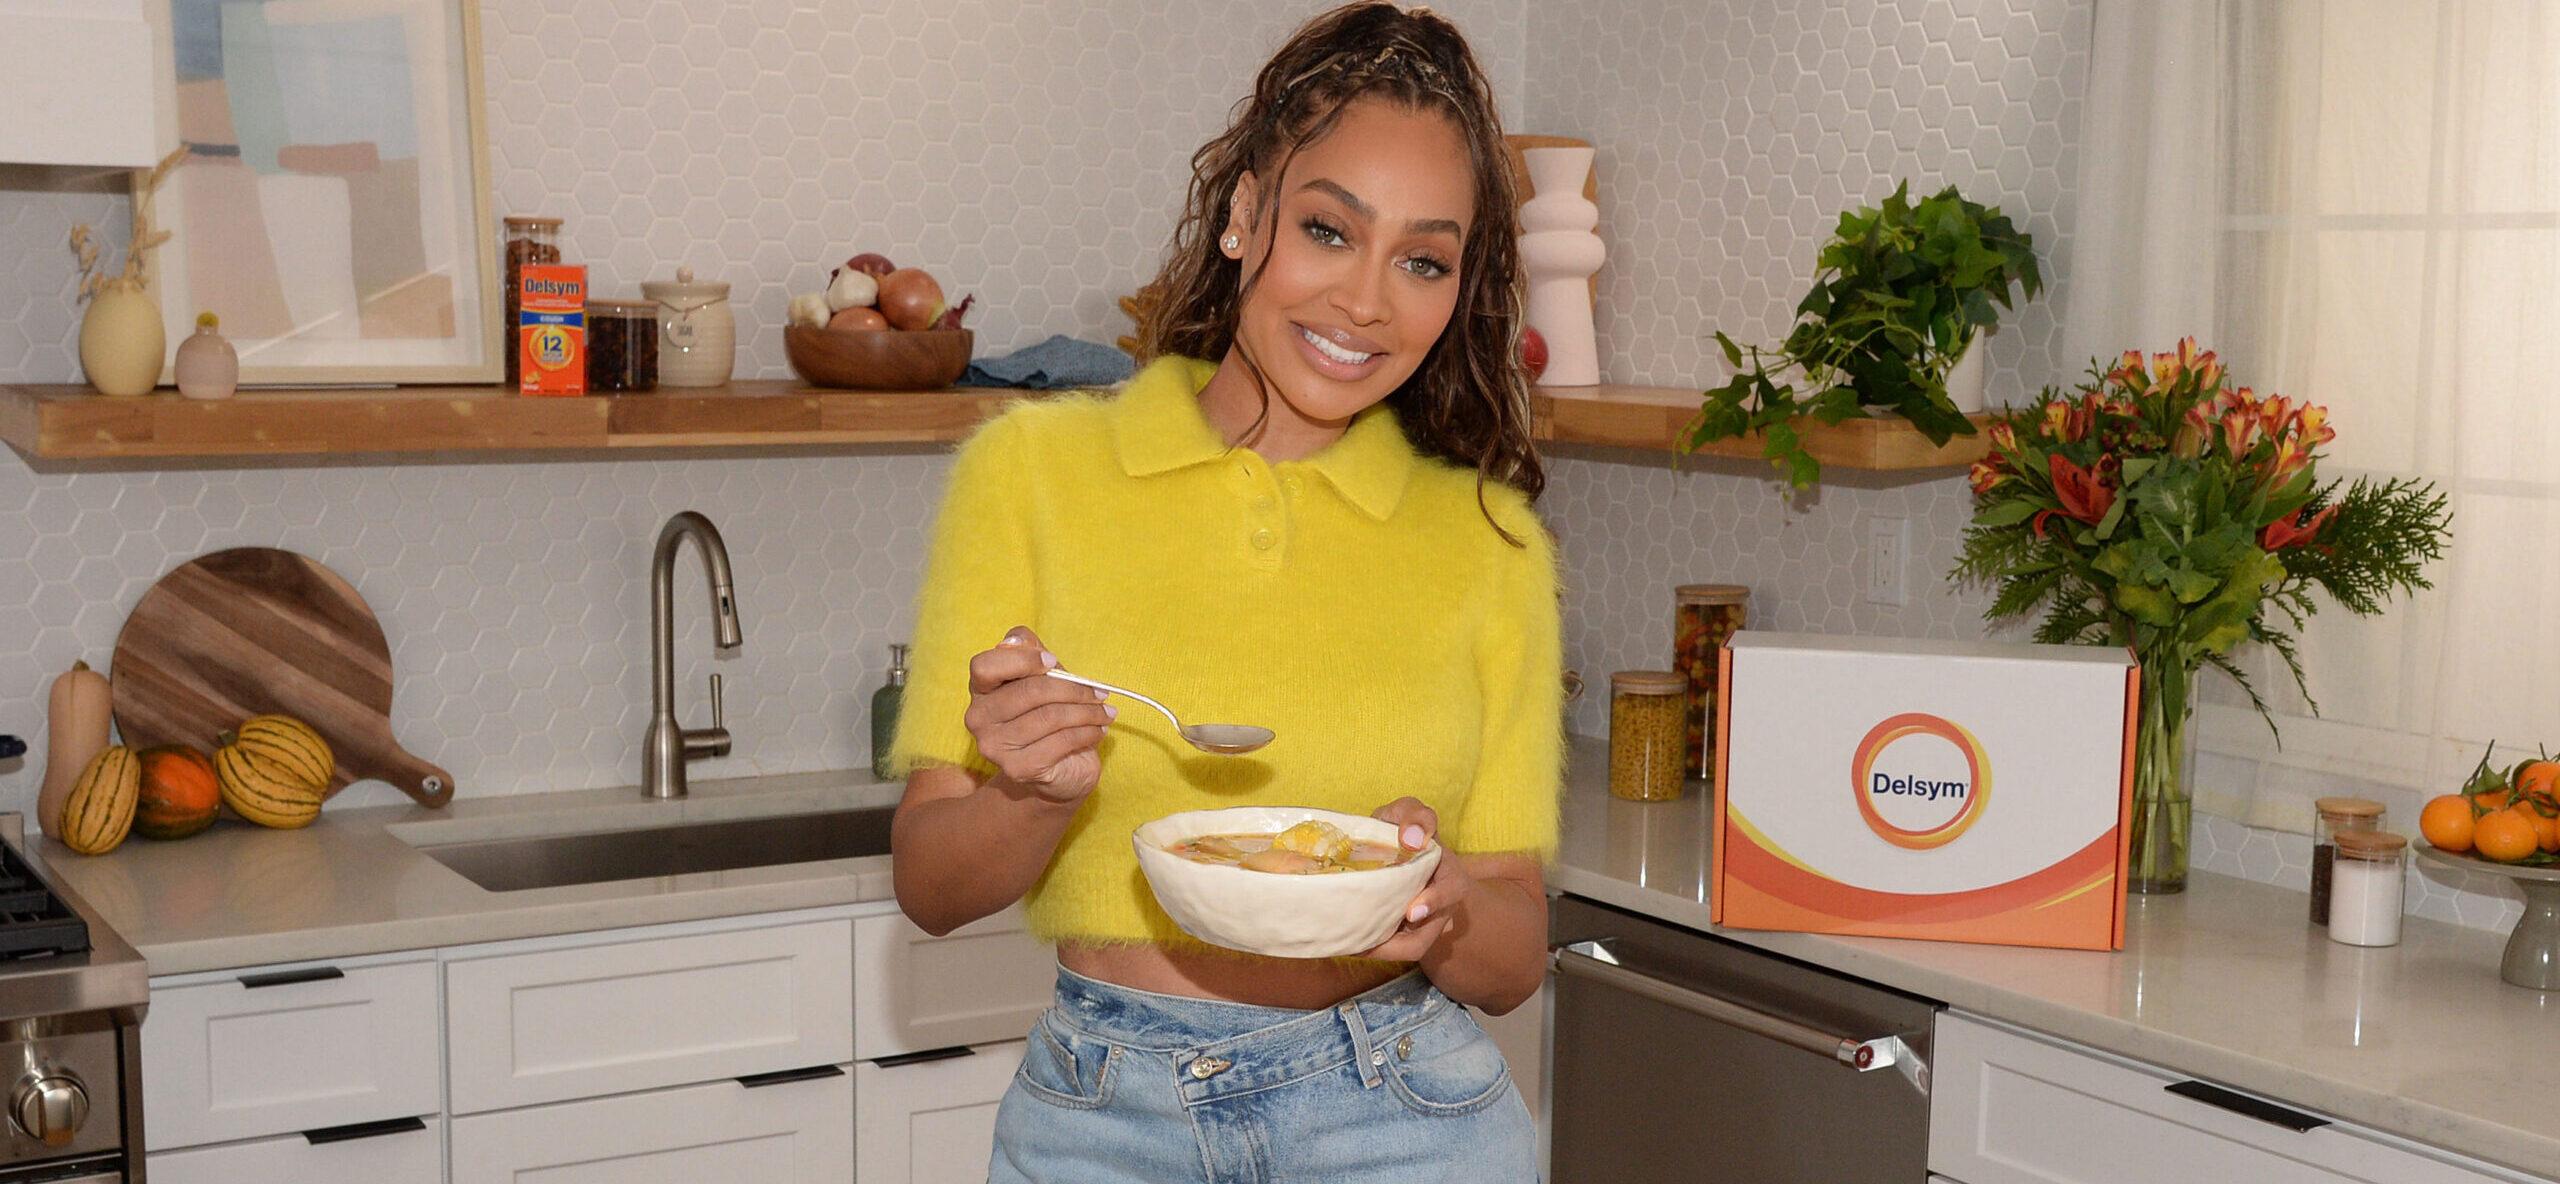 La La Anthony Shares Her Secret Weapons For Cold And Flu Season